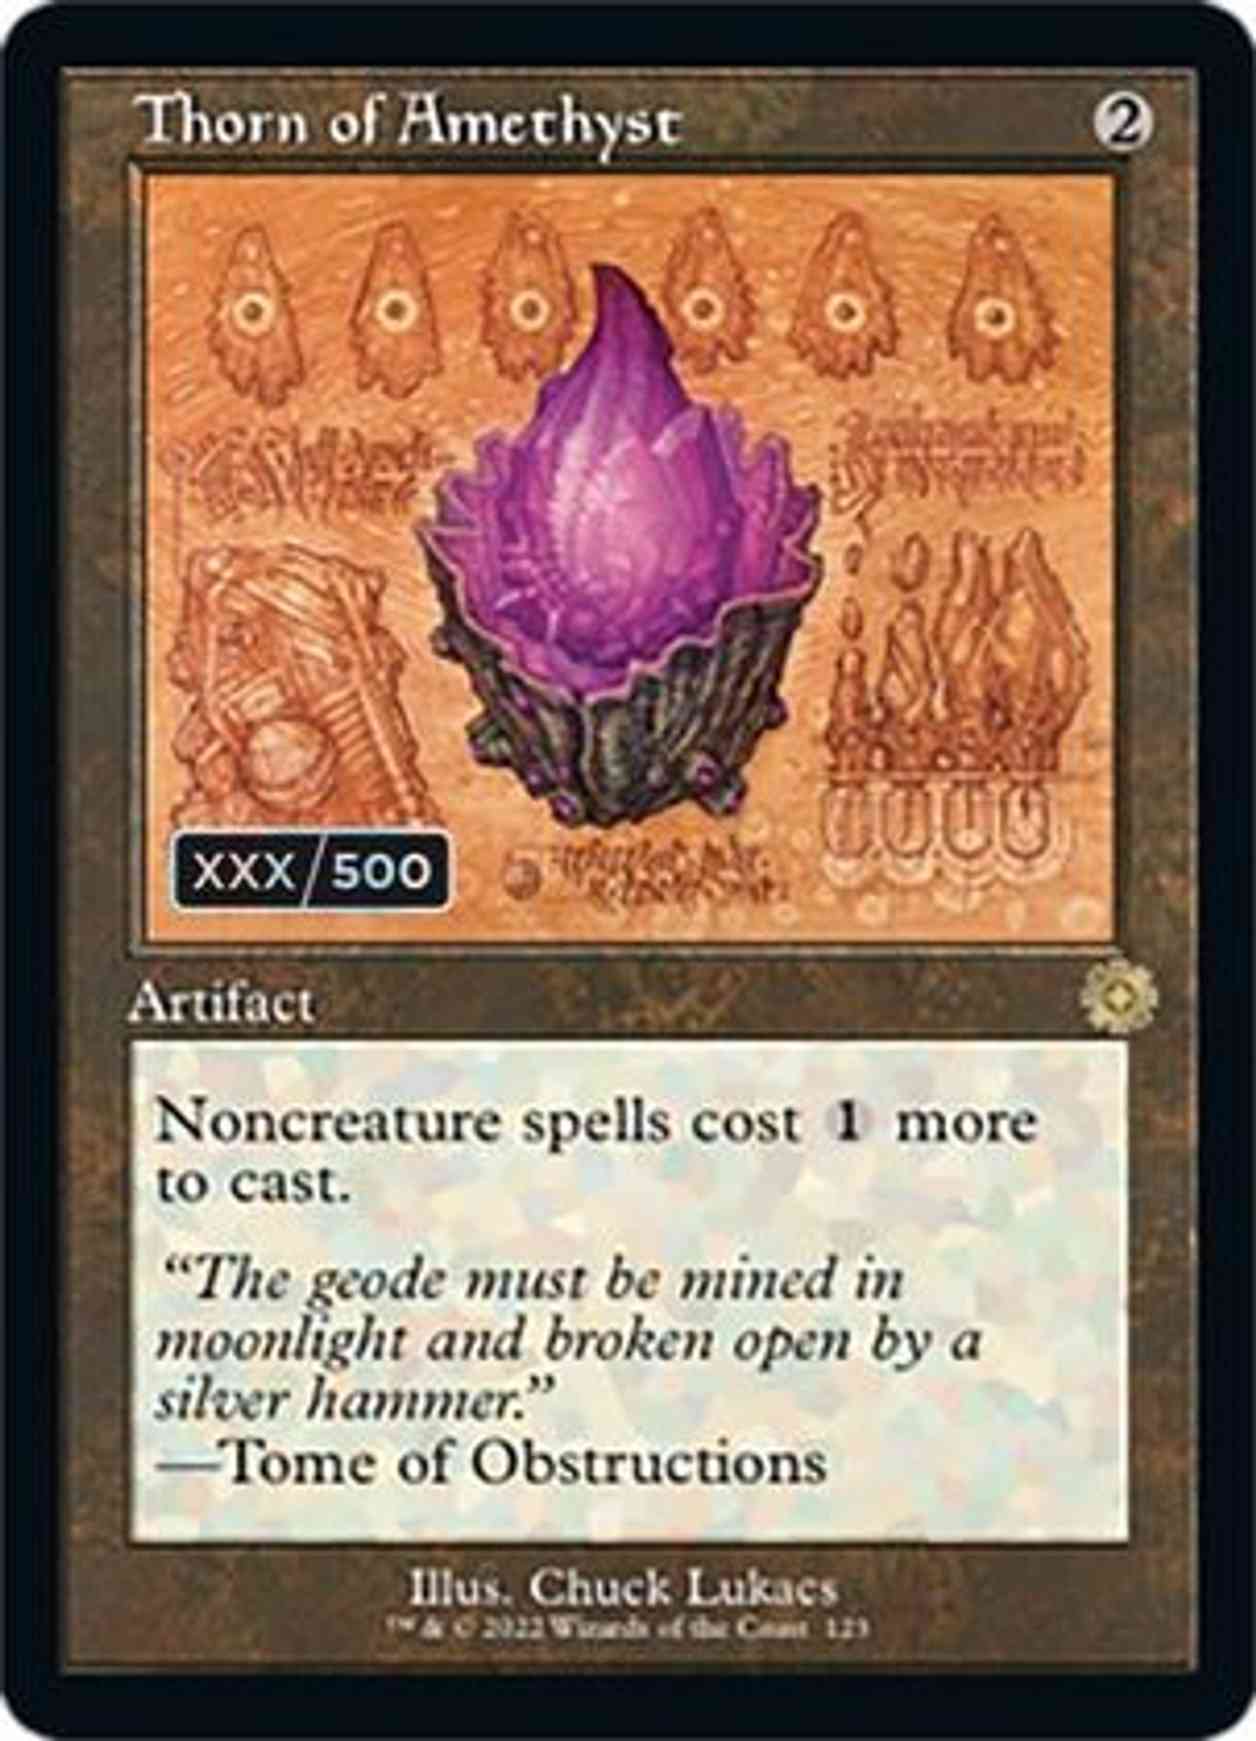 Thorn of Amethyst (Schematic) (Serial Numbered) magic card front